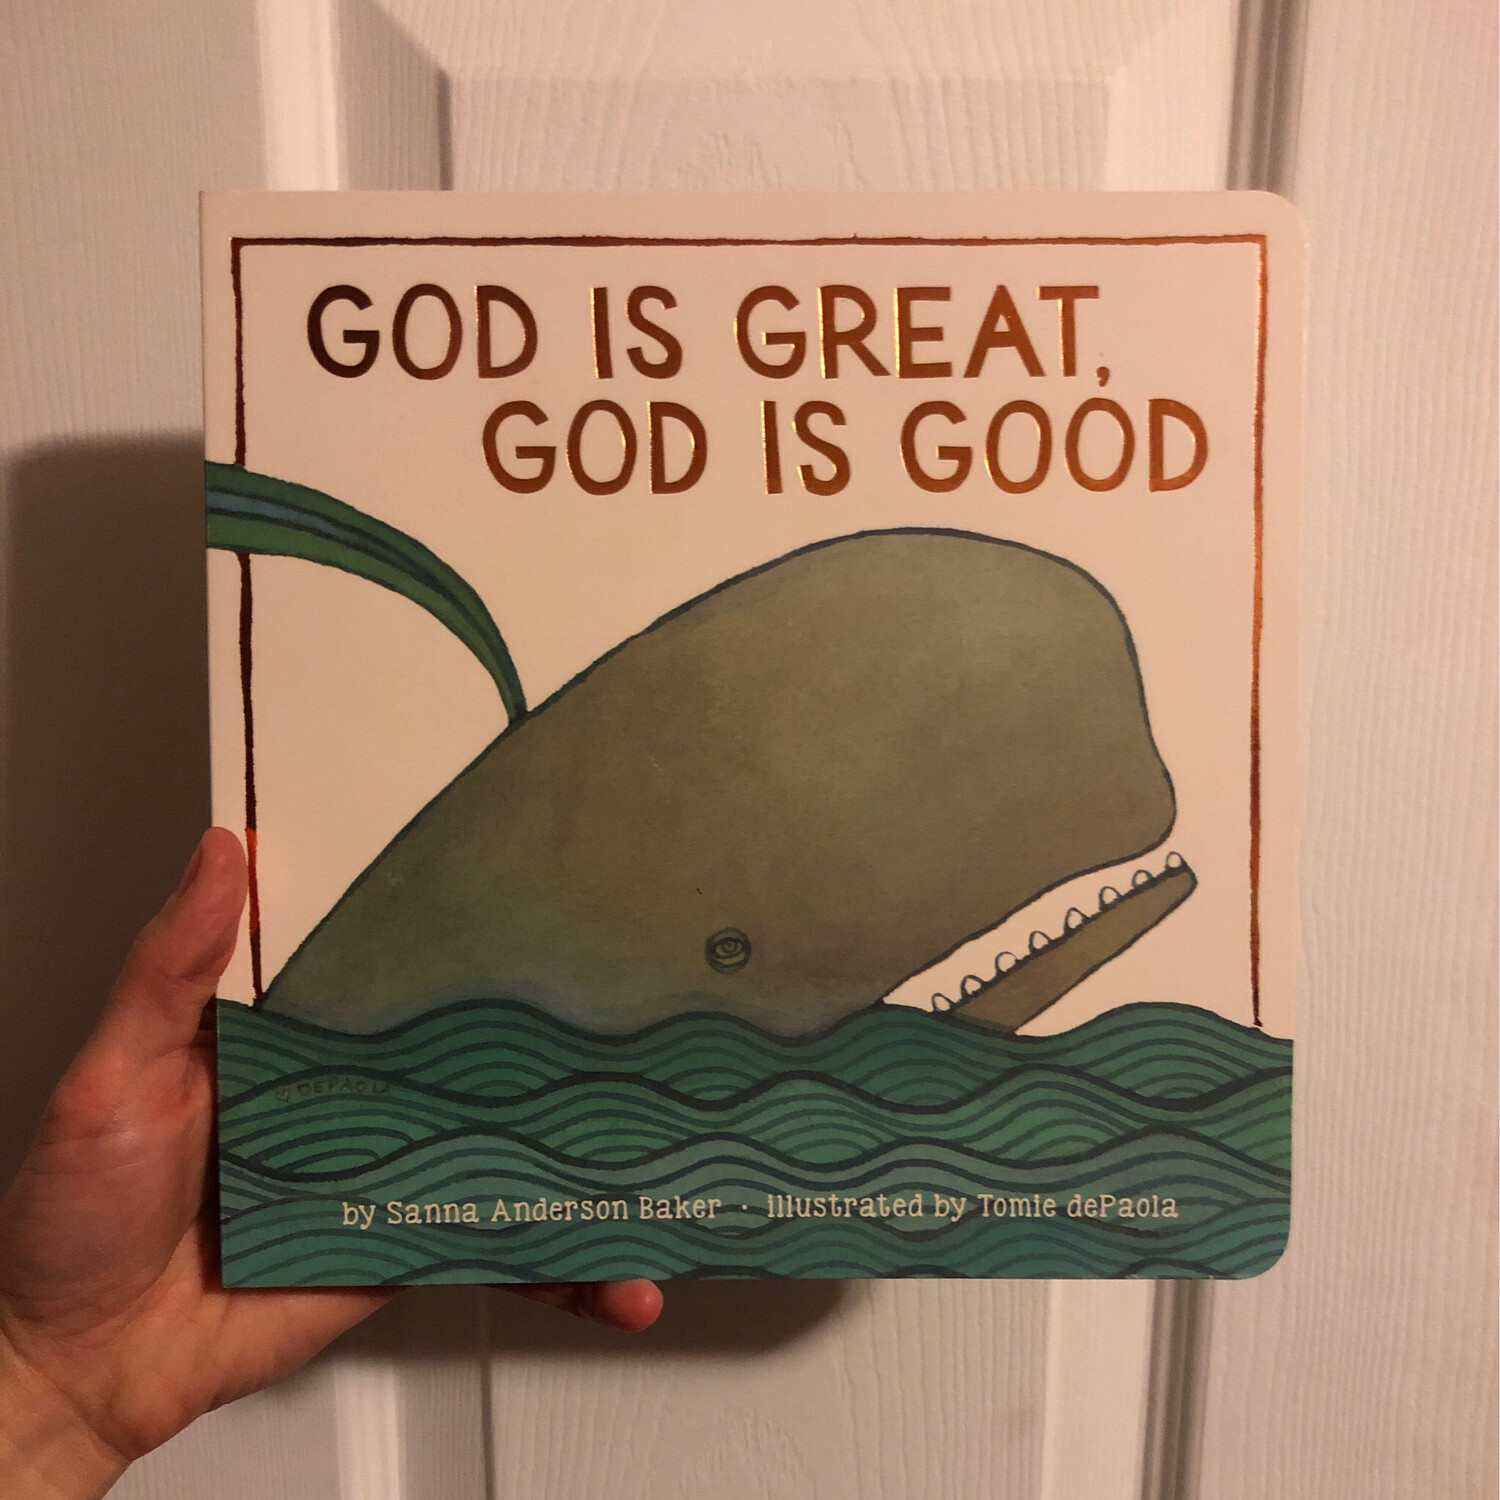 God is Great God is Good by Sanna Anderson Baker Illustrated by Tomie dePaola